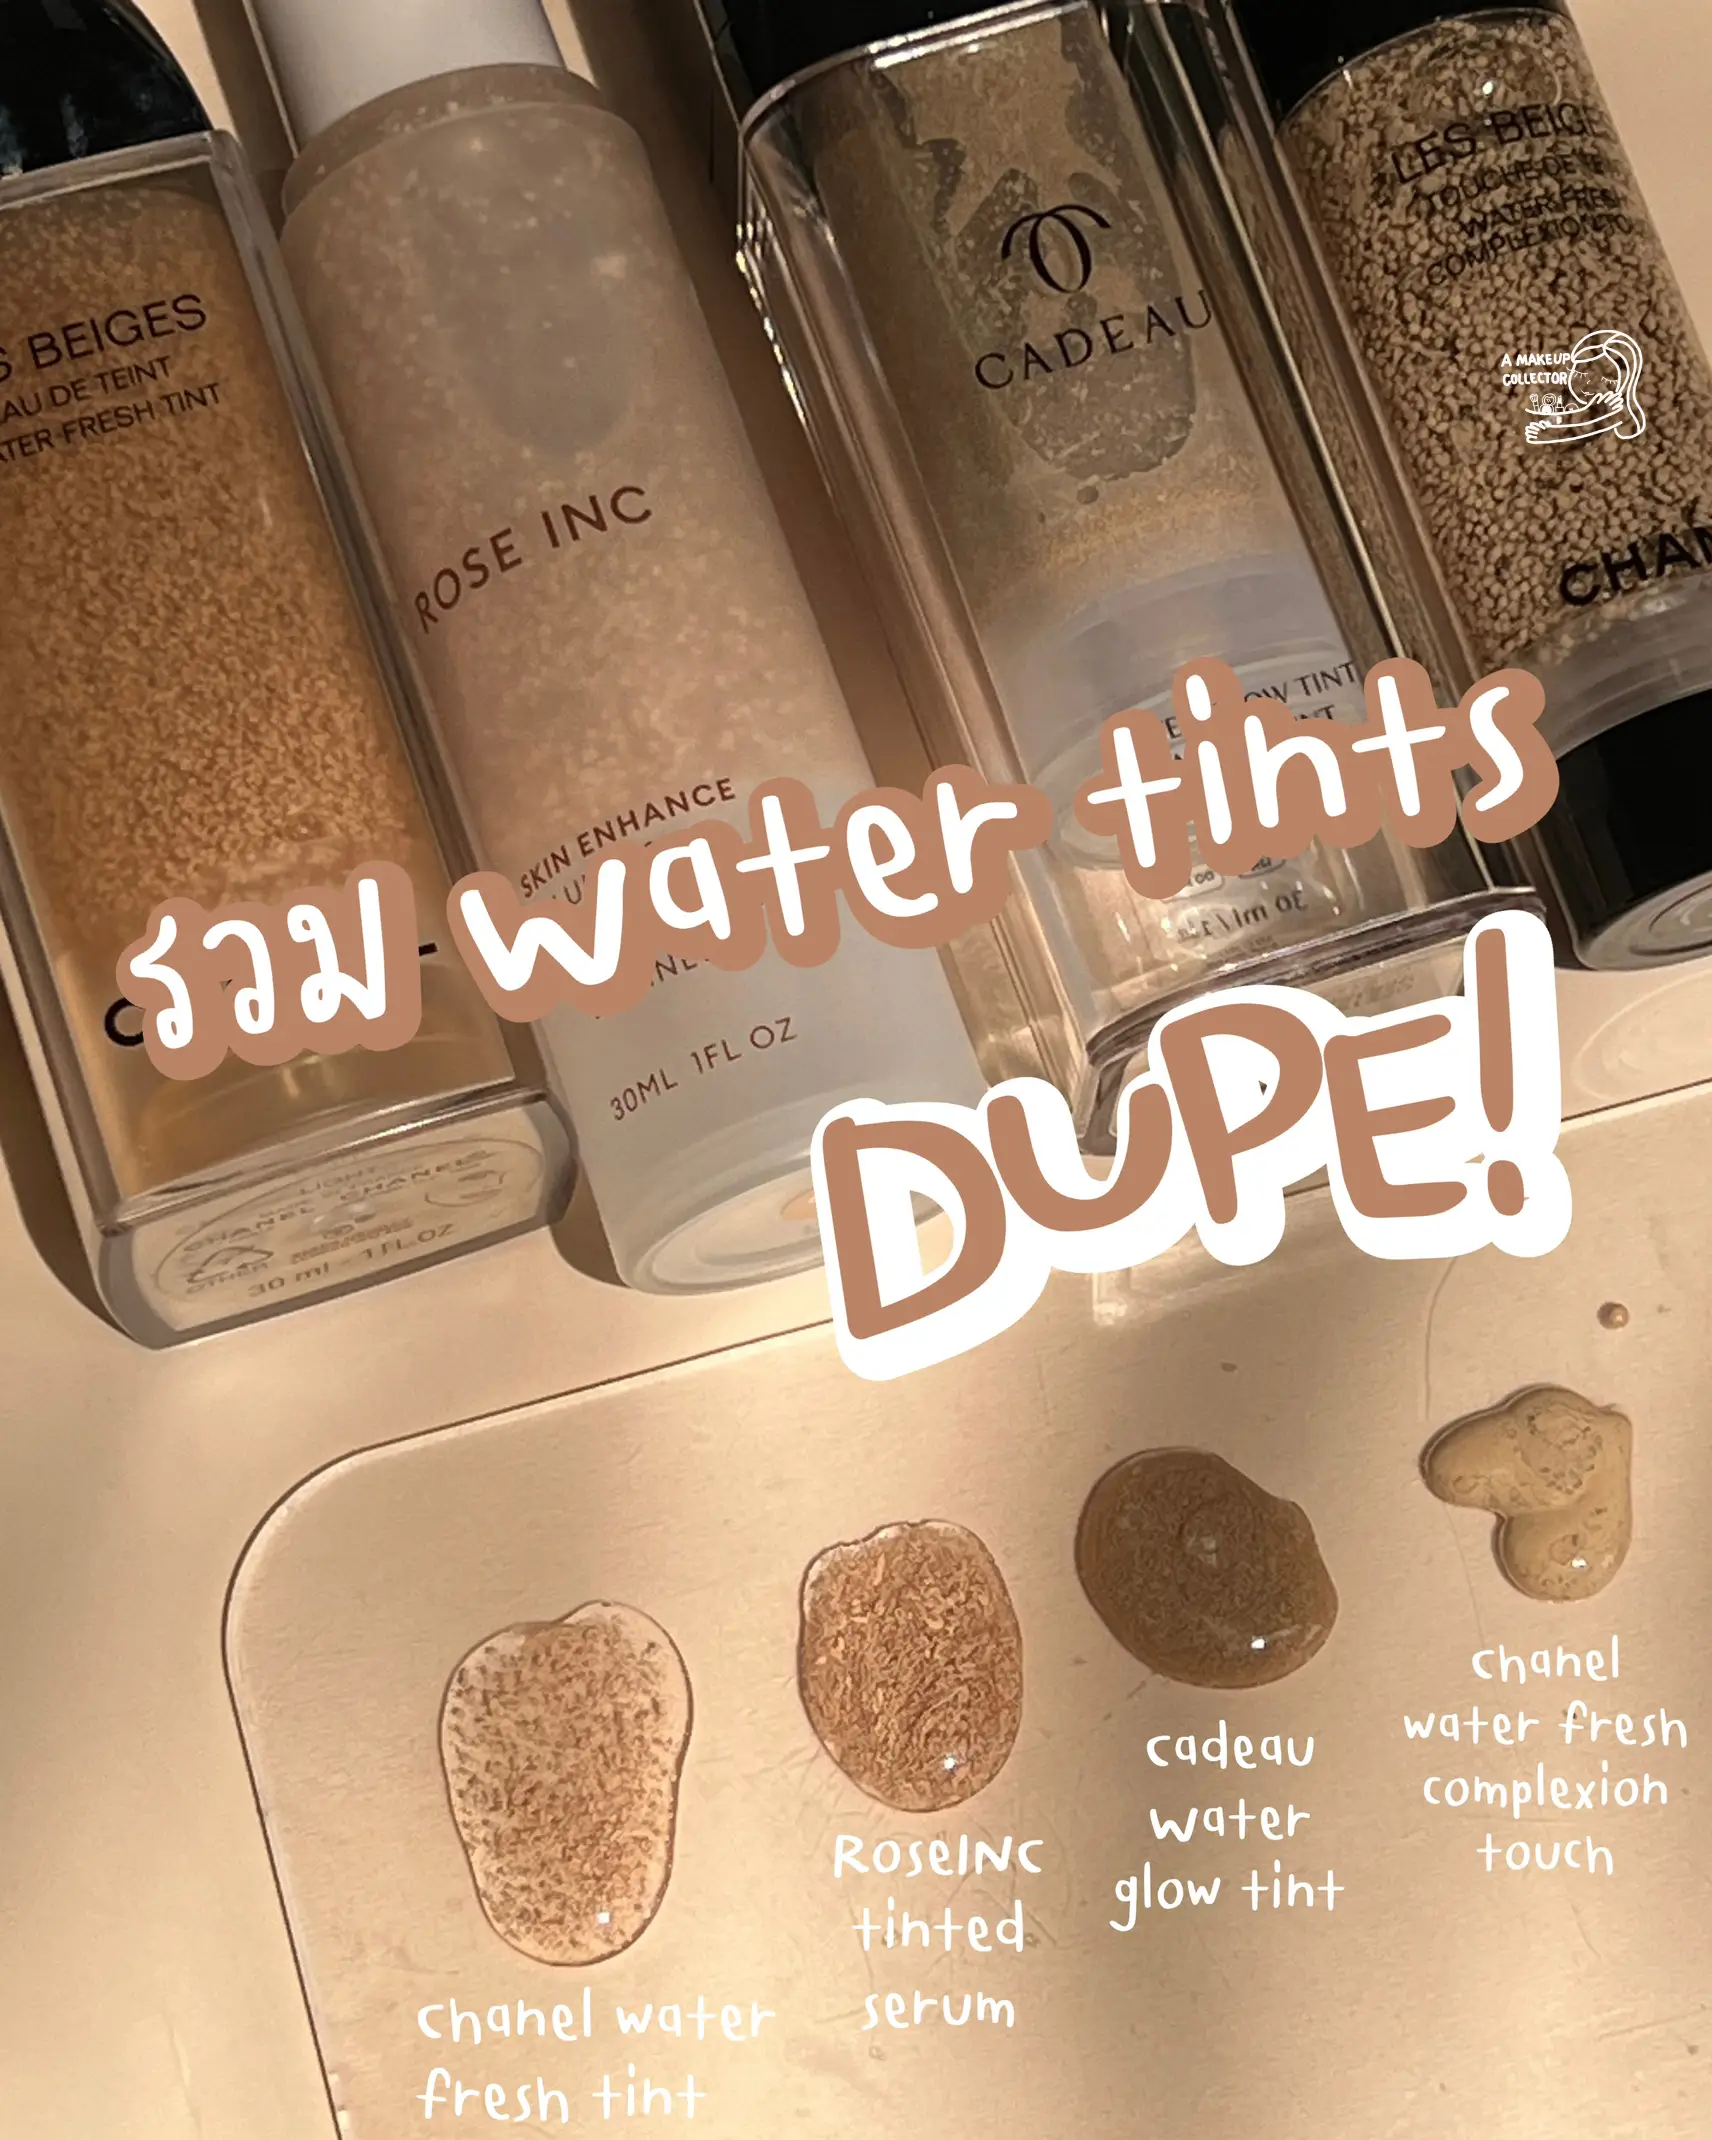 Total water tint DUPE, Skin line comes this way